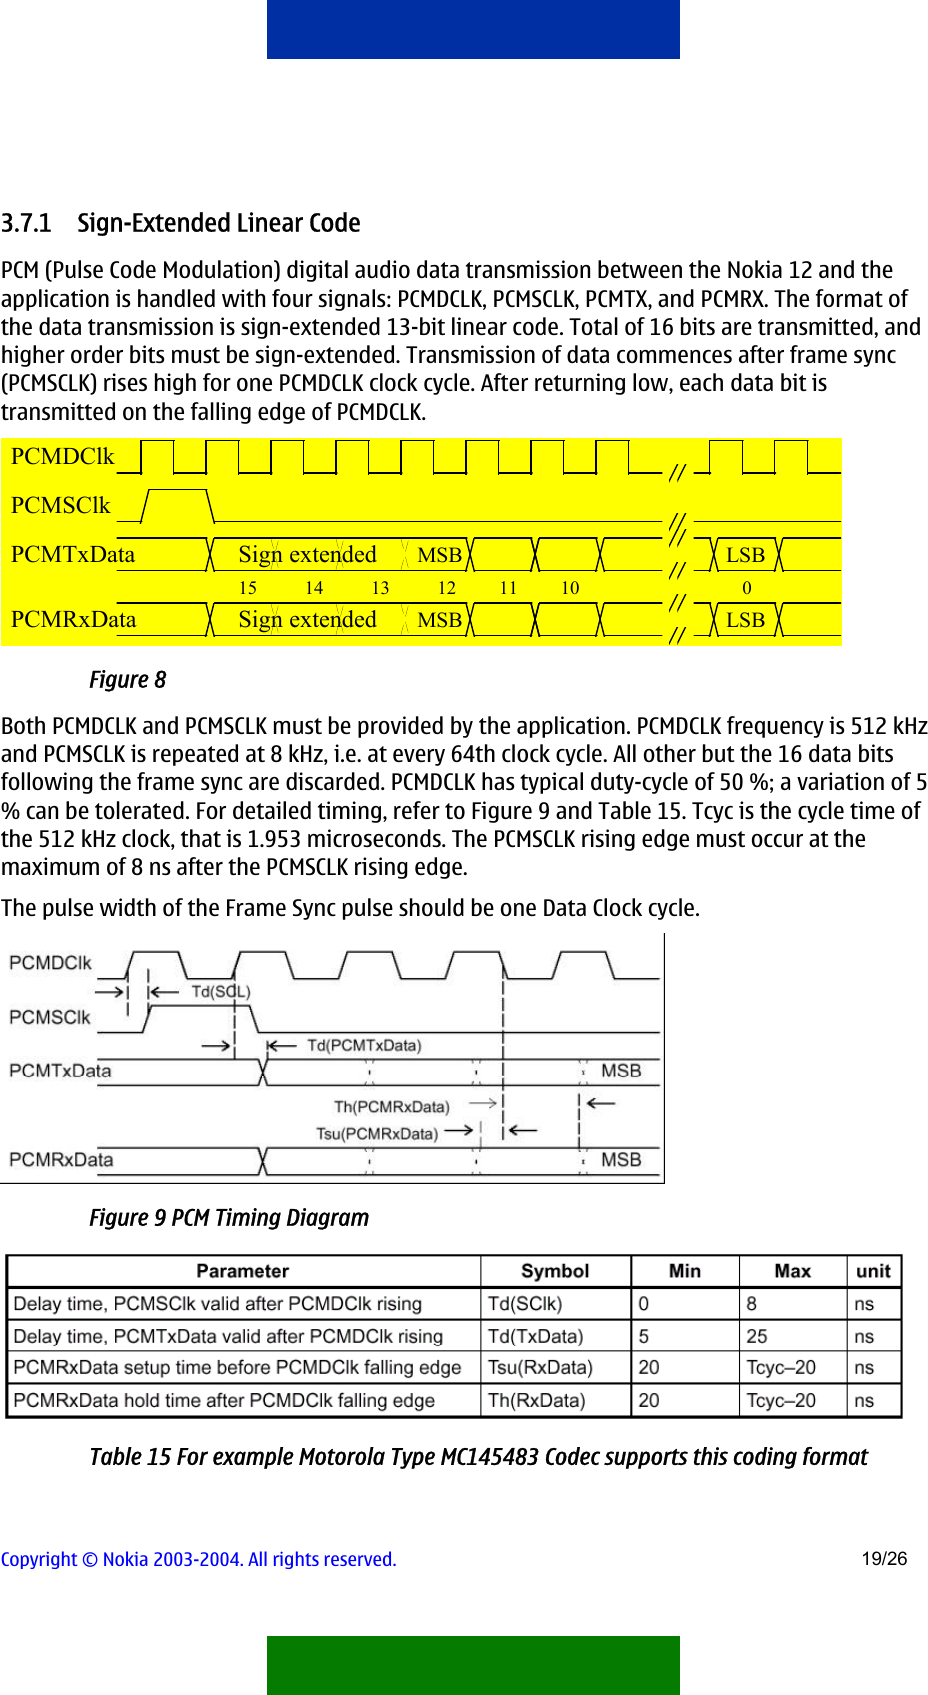  3.7.1 Sign-Extended Linear Code PCM (Pulse Code Modulation) digital audio data transmission between the Nokia 12 and the application is handled with four signals: PCMDCLK, PCMSCLK, PCMTX, and PCMRX. The format of the data transmission is sign-extended 13-bit linear code. Total of 16 bits are transmitted, and higher order bits must be sign-extended. Transmission of data commences after frame sync (PCMSCLK) rises high for one PCMDCLK clock cycle. After returning low, each data bit is transmitted on the falling edge of PCMDCLK. 15          14          13          12         11         10LSBMSBSign extended0LSBMSBSign extendedPCMDClkPCMSClkPCMTxDataPCMRxData  Figure 8 Both PCMDCLK and PCMSCLK must be provided by the application. PCMDCLK frequency is 512 kHz and PCMSCLK is repeated at 8 kHz, i.e. at every 64th clock cycle. All other but the 16 data bits following the frame sync are discarded. PCMDCLK has typical duty-cycle of 50 %; a variation of 5 % can be tolerated. For detailed timing, refer to Figure 9 and Table 15. Tcyc is the cycle time of the 512 kHz clock, that is 1.953 microseconds. The PCMSCLK rising edge must occur at the maximum of 8 ns after the PCMSCLK rising edge. The pulse width of the Frame Sync pulse should be one Data Clock cycle.     Figure 9 PCM Timing Diagram   Table 15 For example Motorola Type MC145483 Codec supports this coding format Copyright © Nokia 2003-2004. All rights reserved.   19/26  